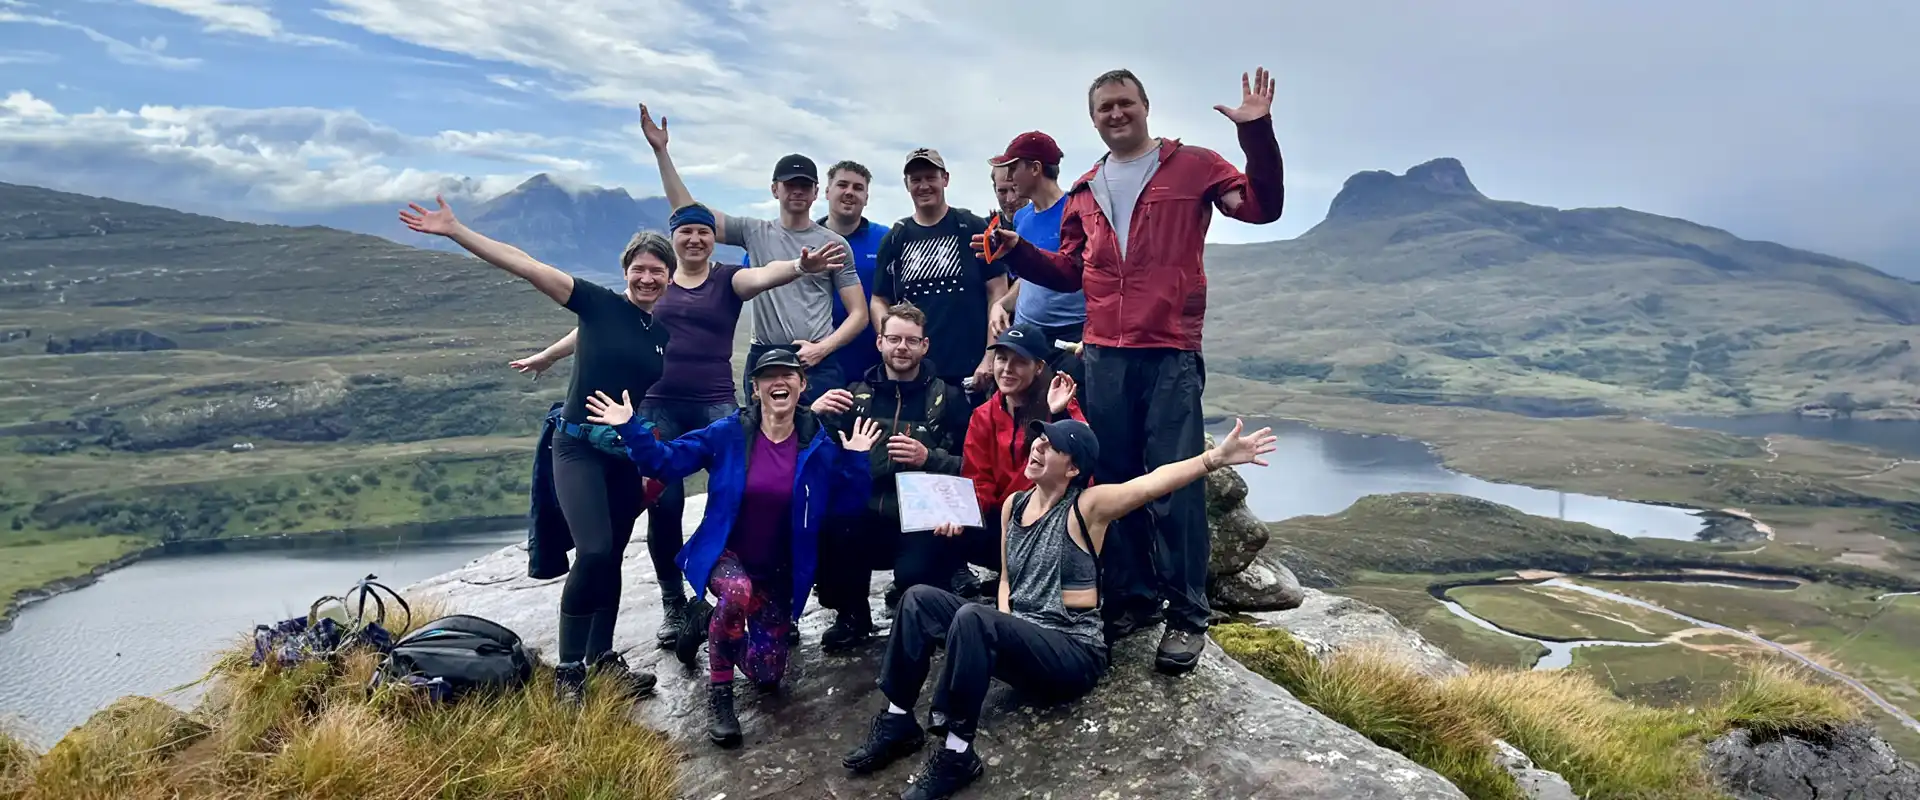 a group of smiling people posing for a camera on top of a hill with mountainous backdrop. Northwest highlands